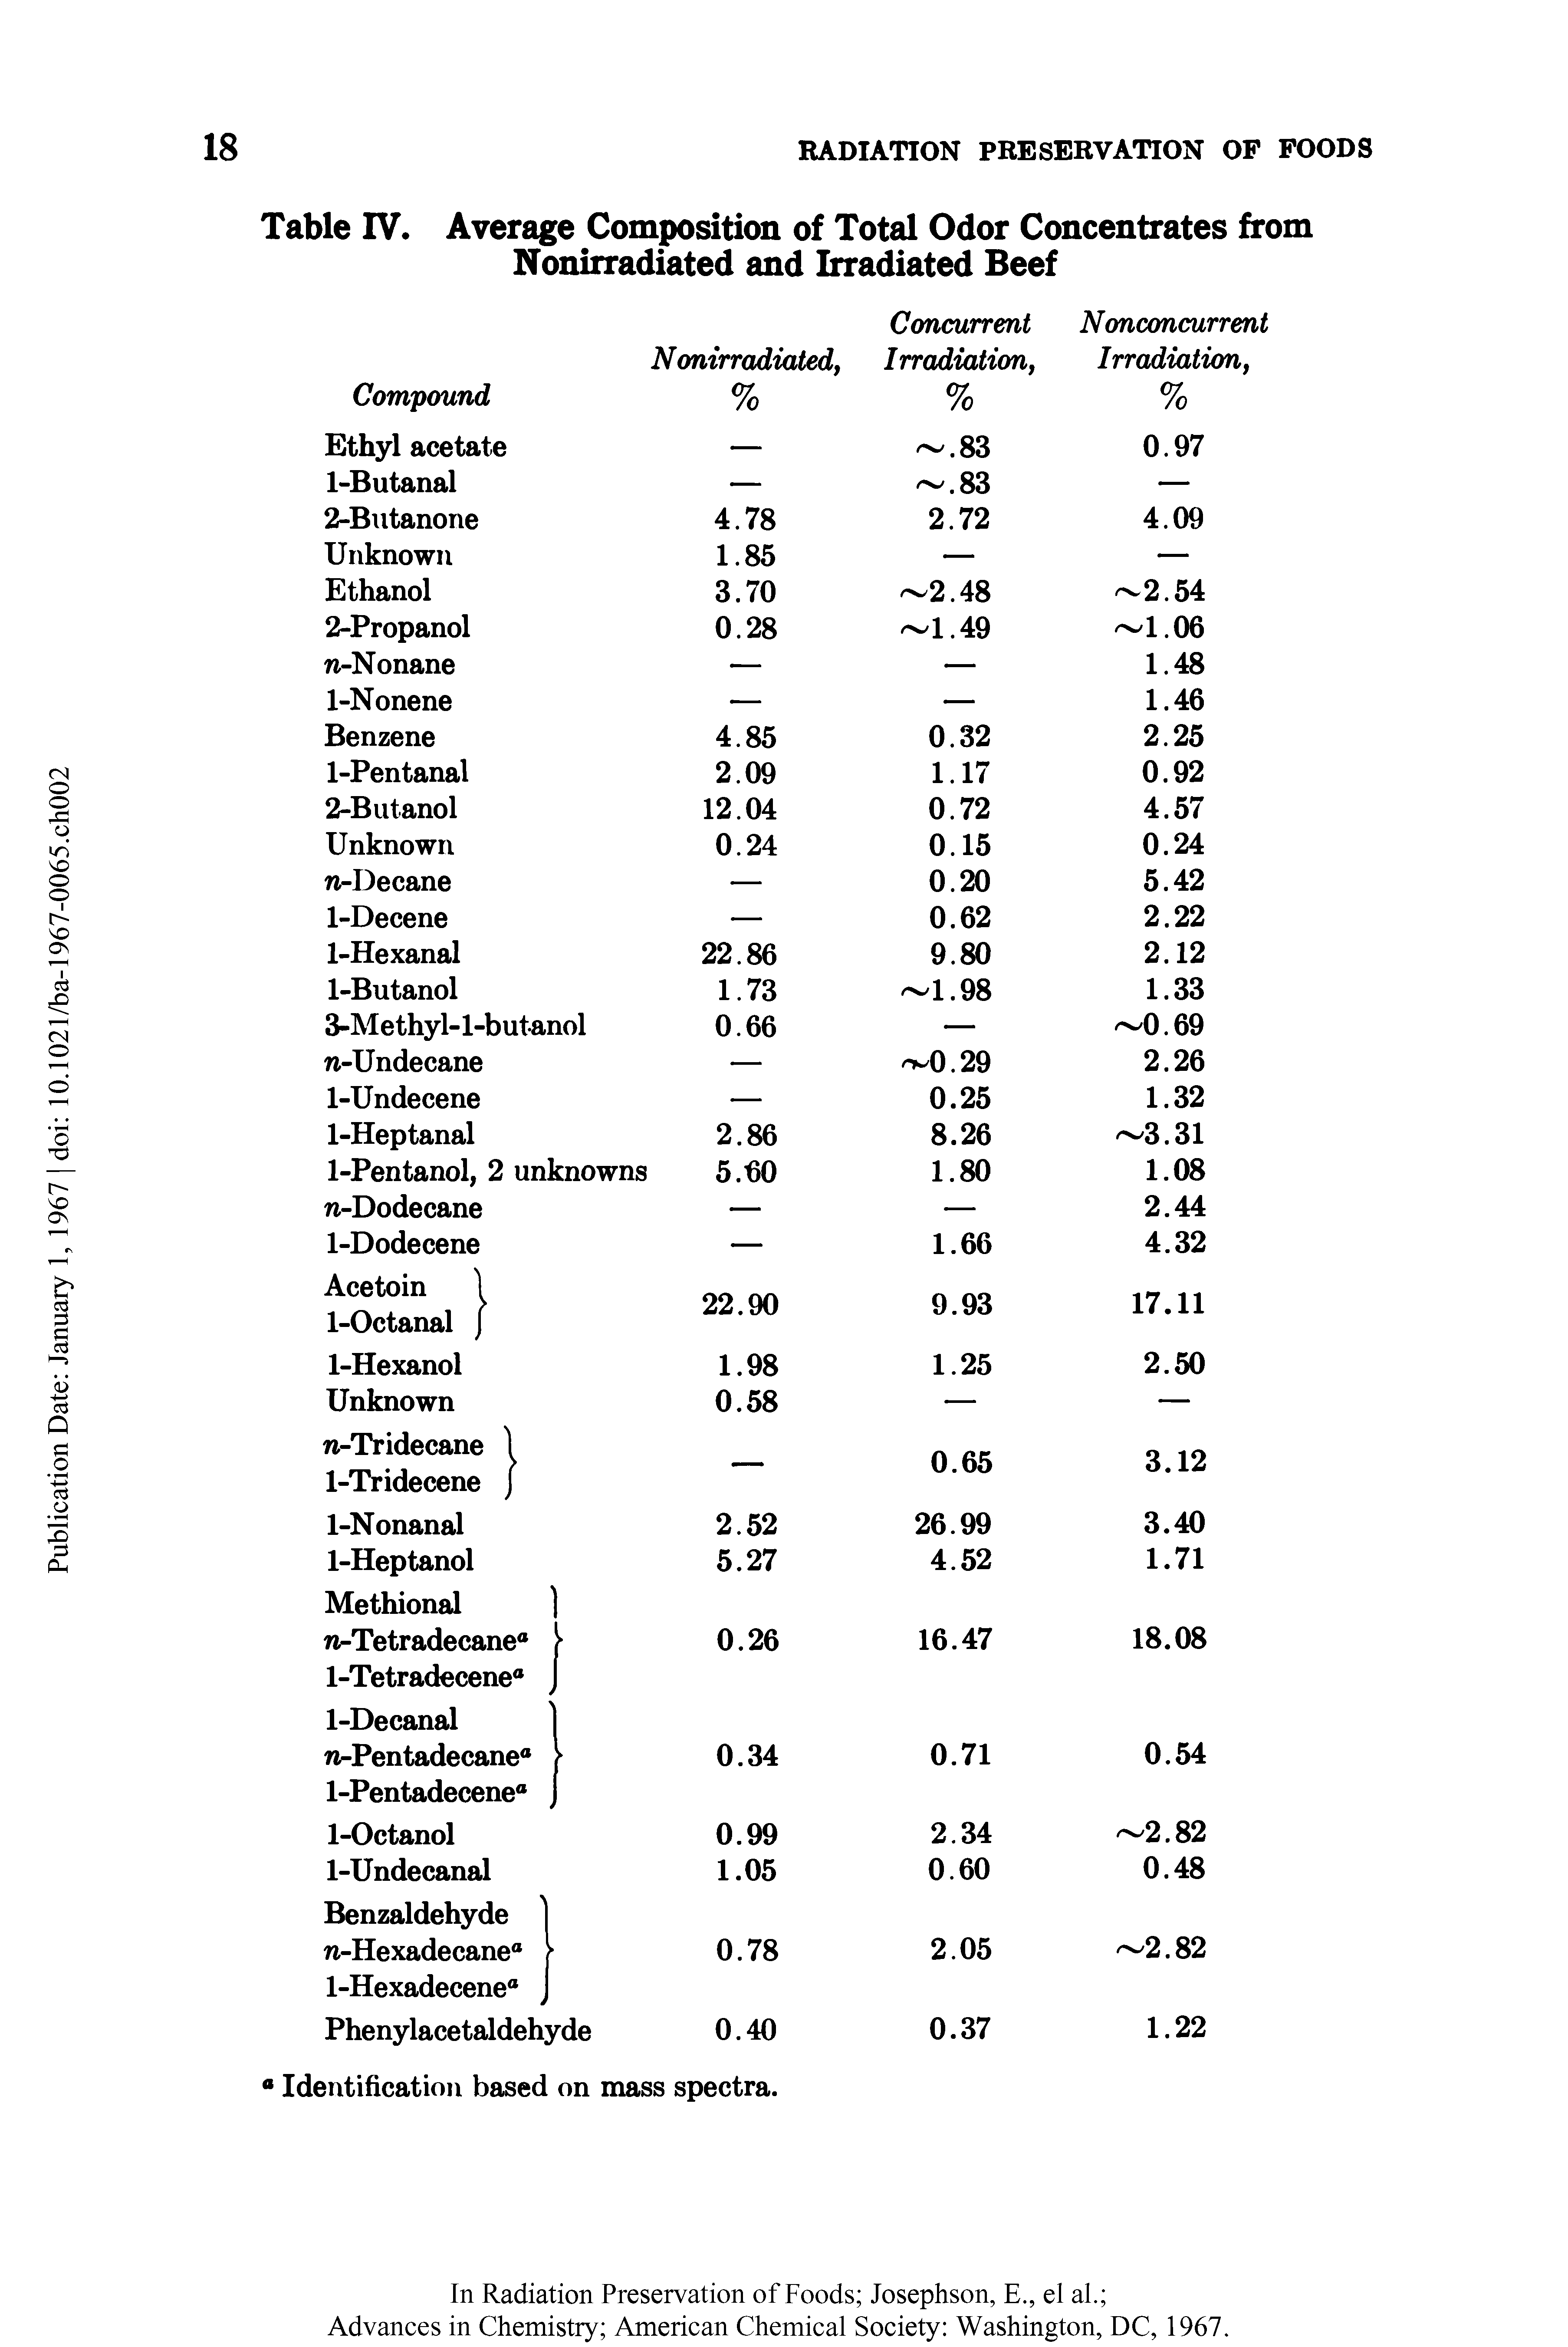 Table IV. Average Composition of Total Odor Concentrates from Nonirradiated and Irradiated Beef...